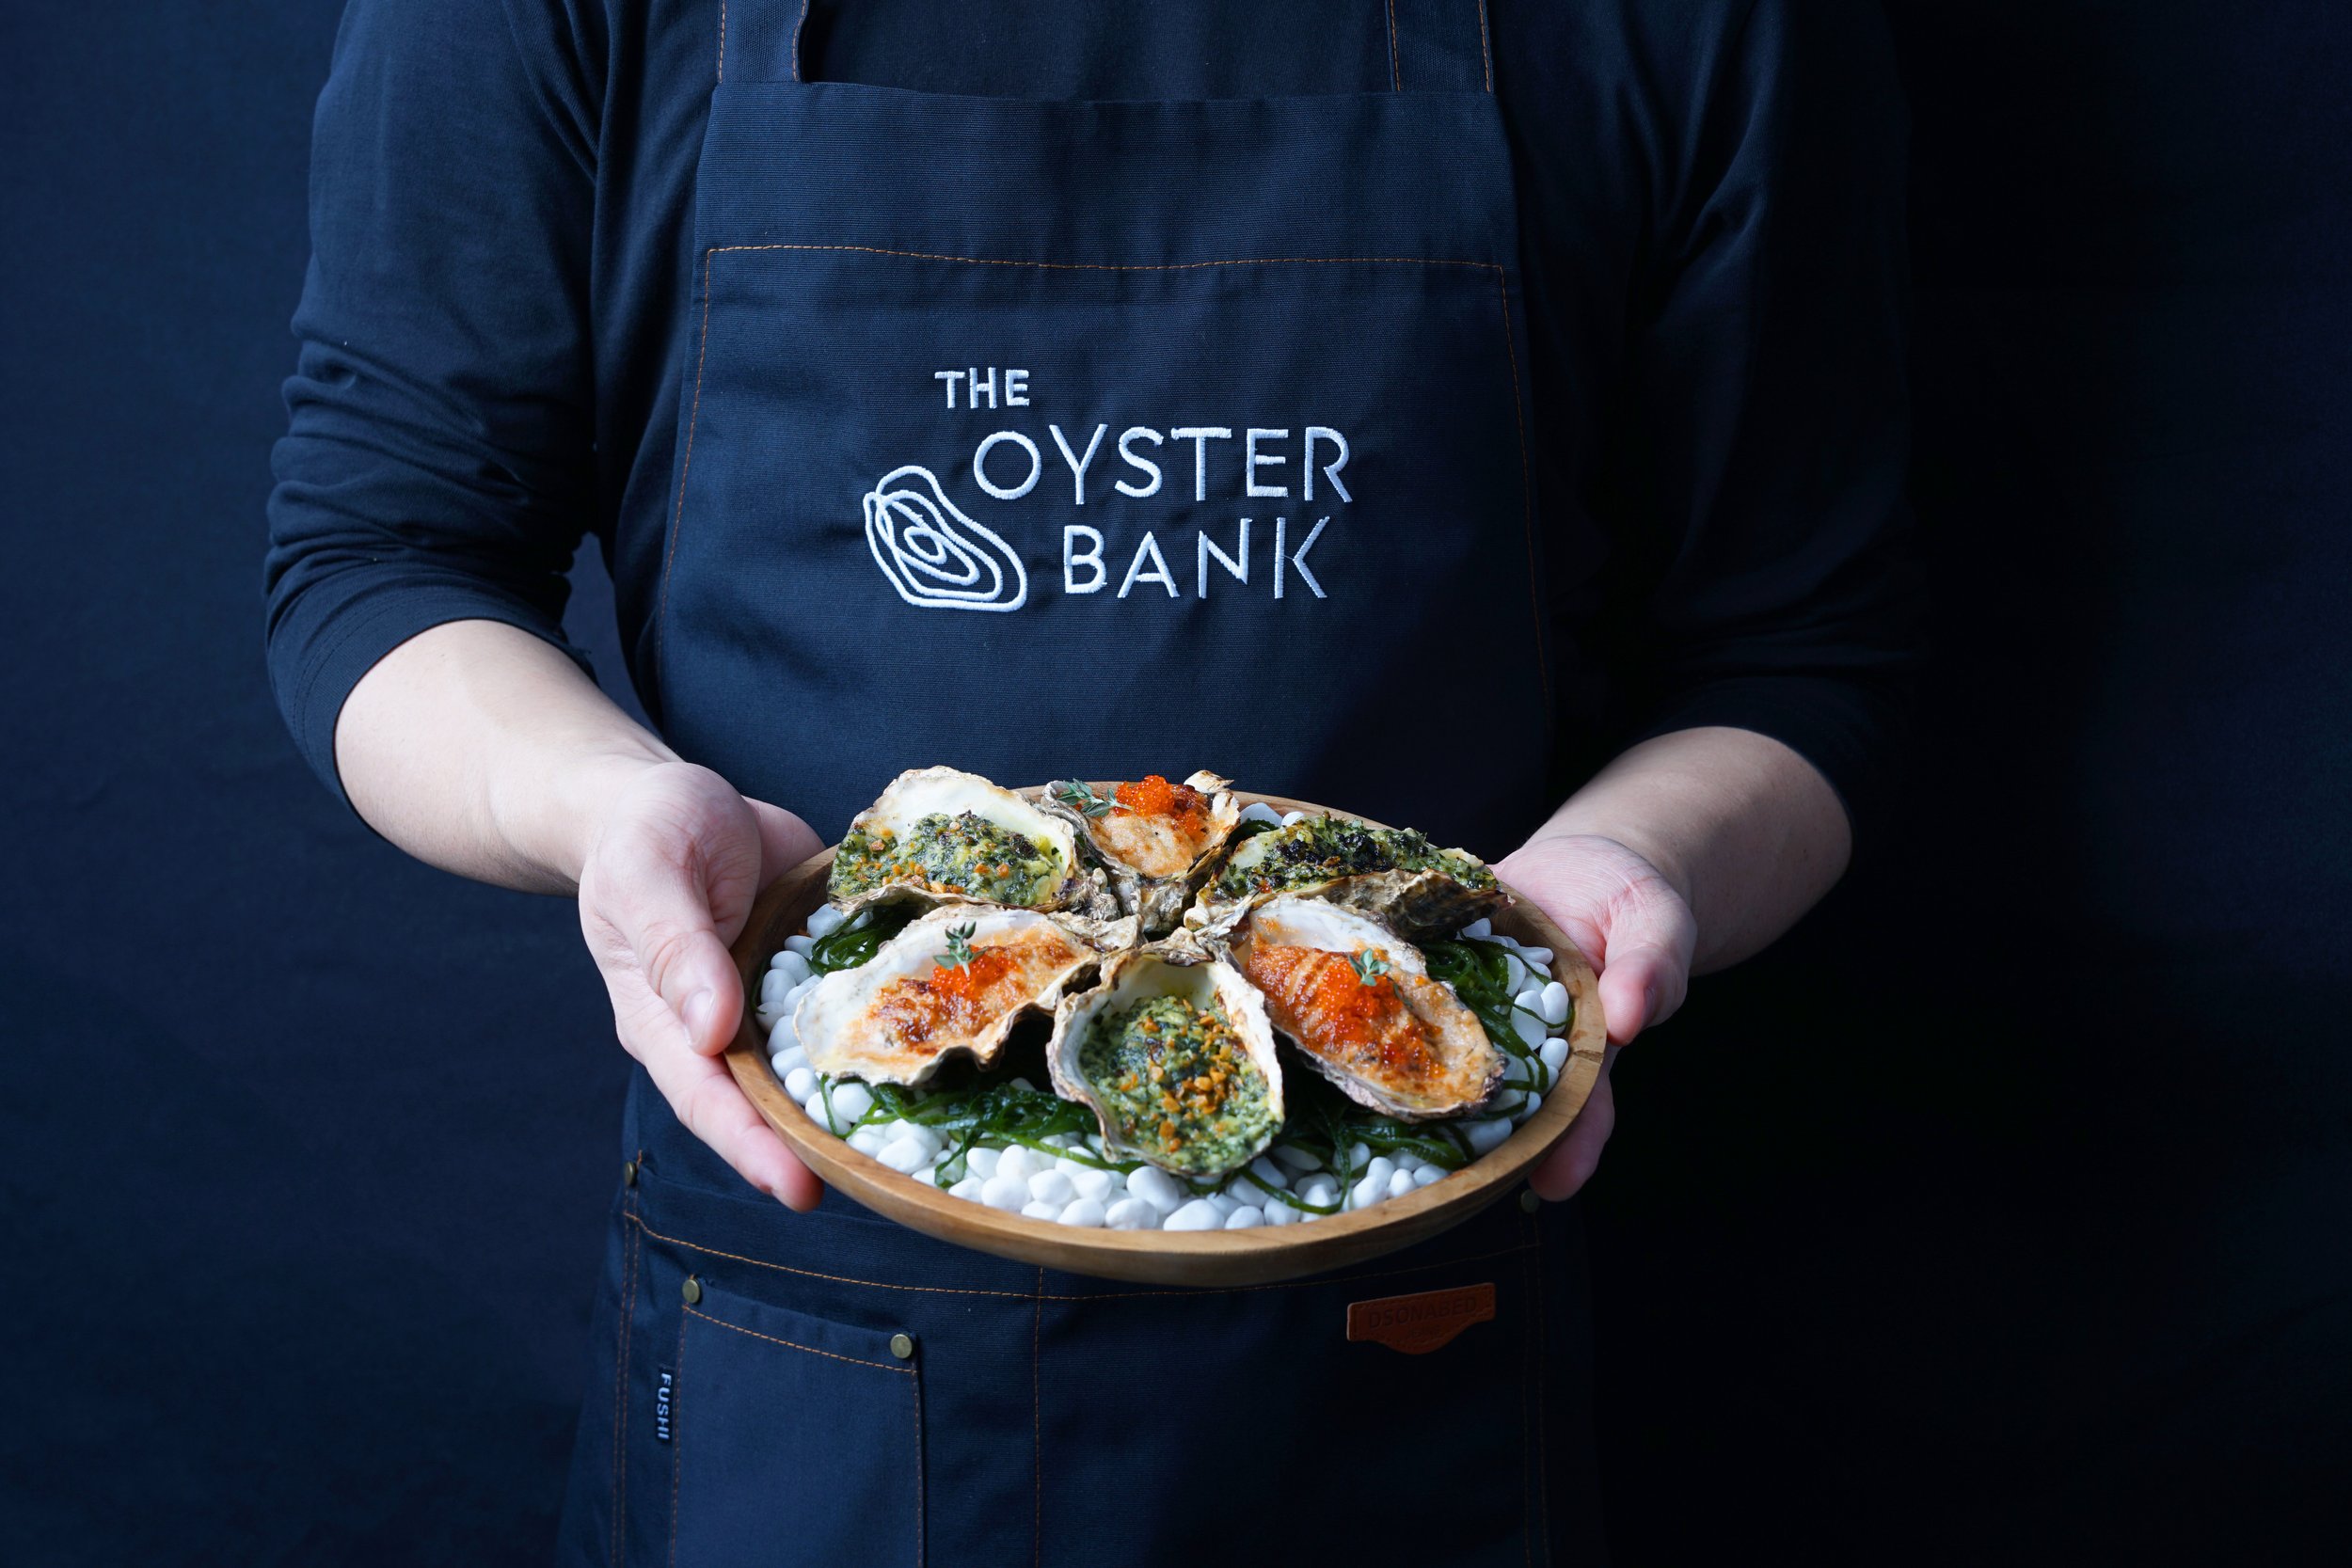 THE OYSTER BANK 25.jpg